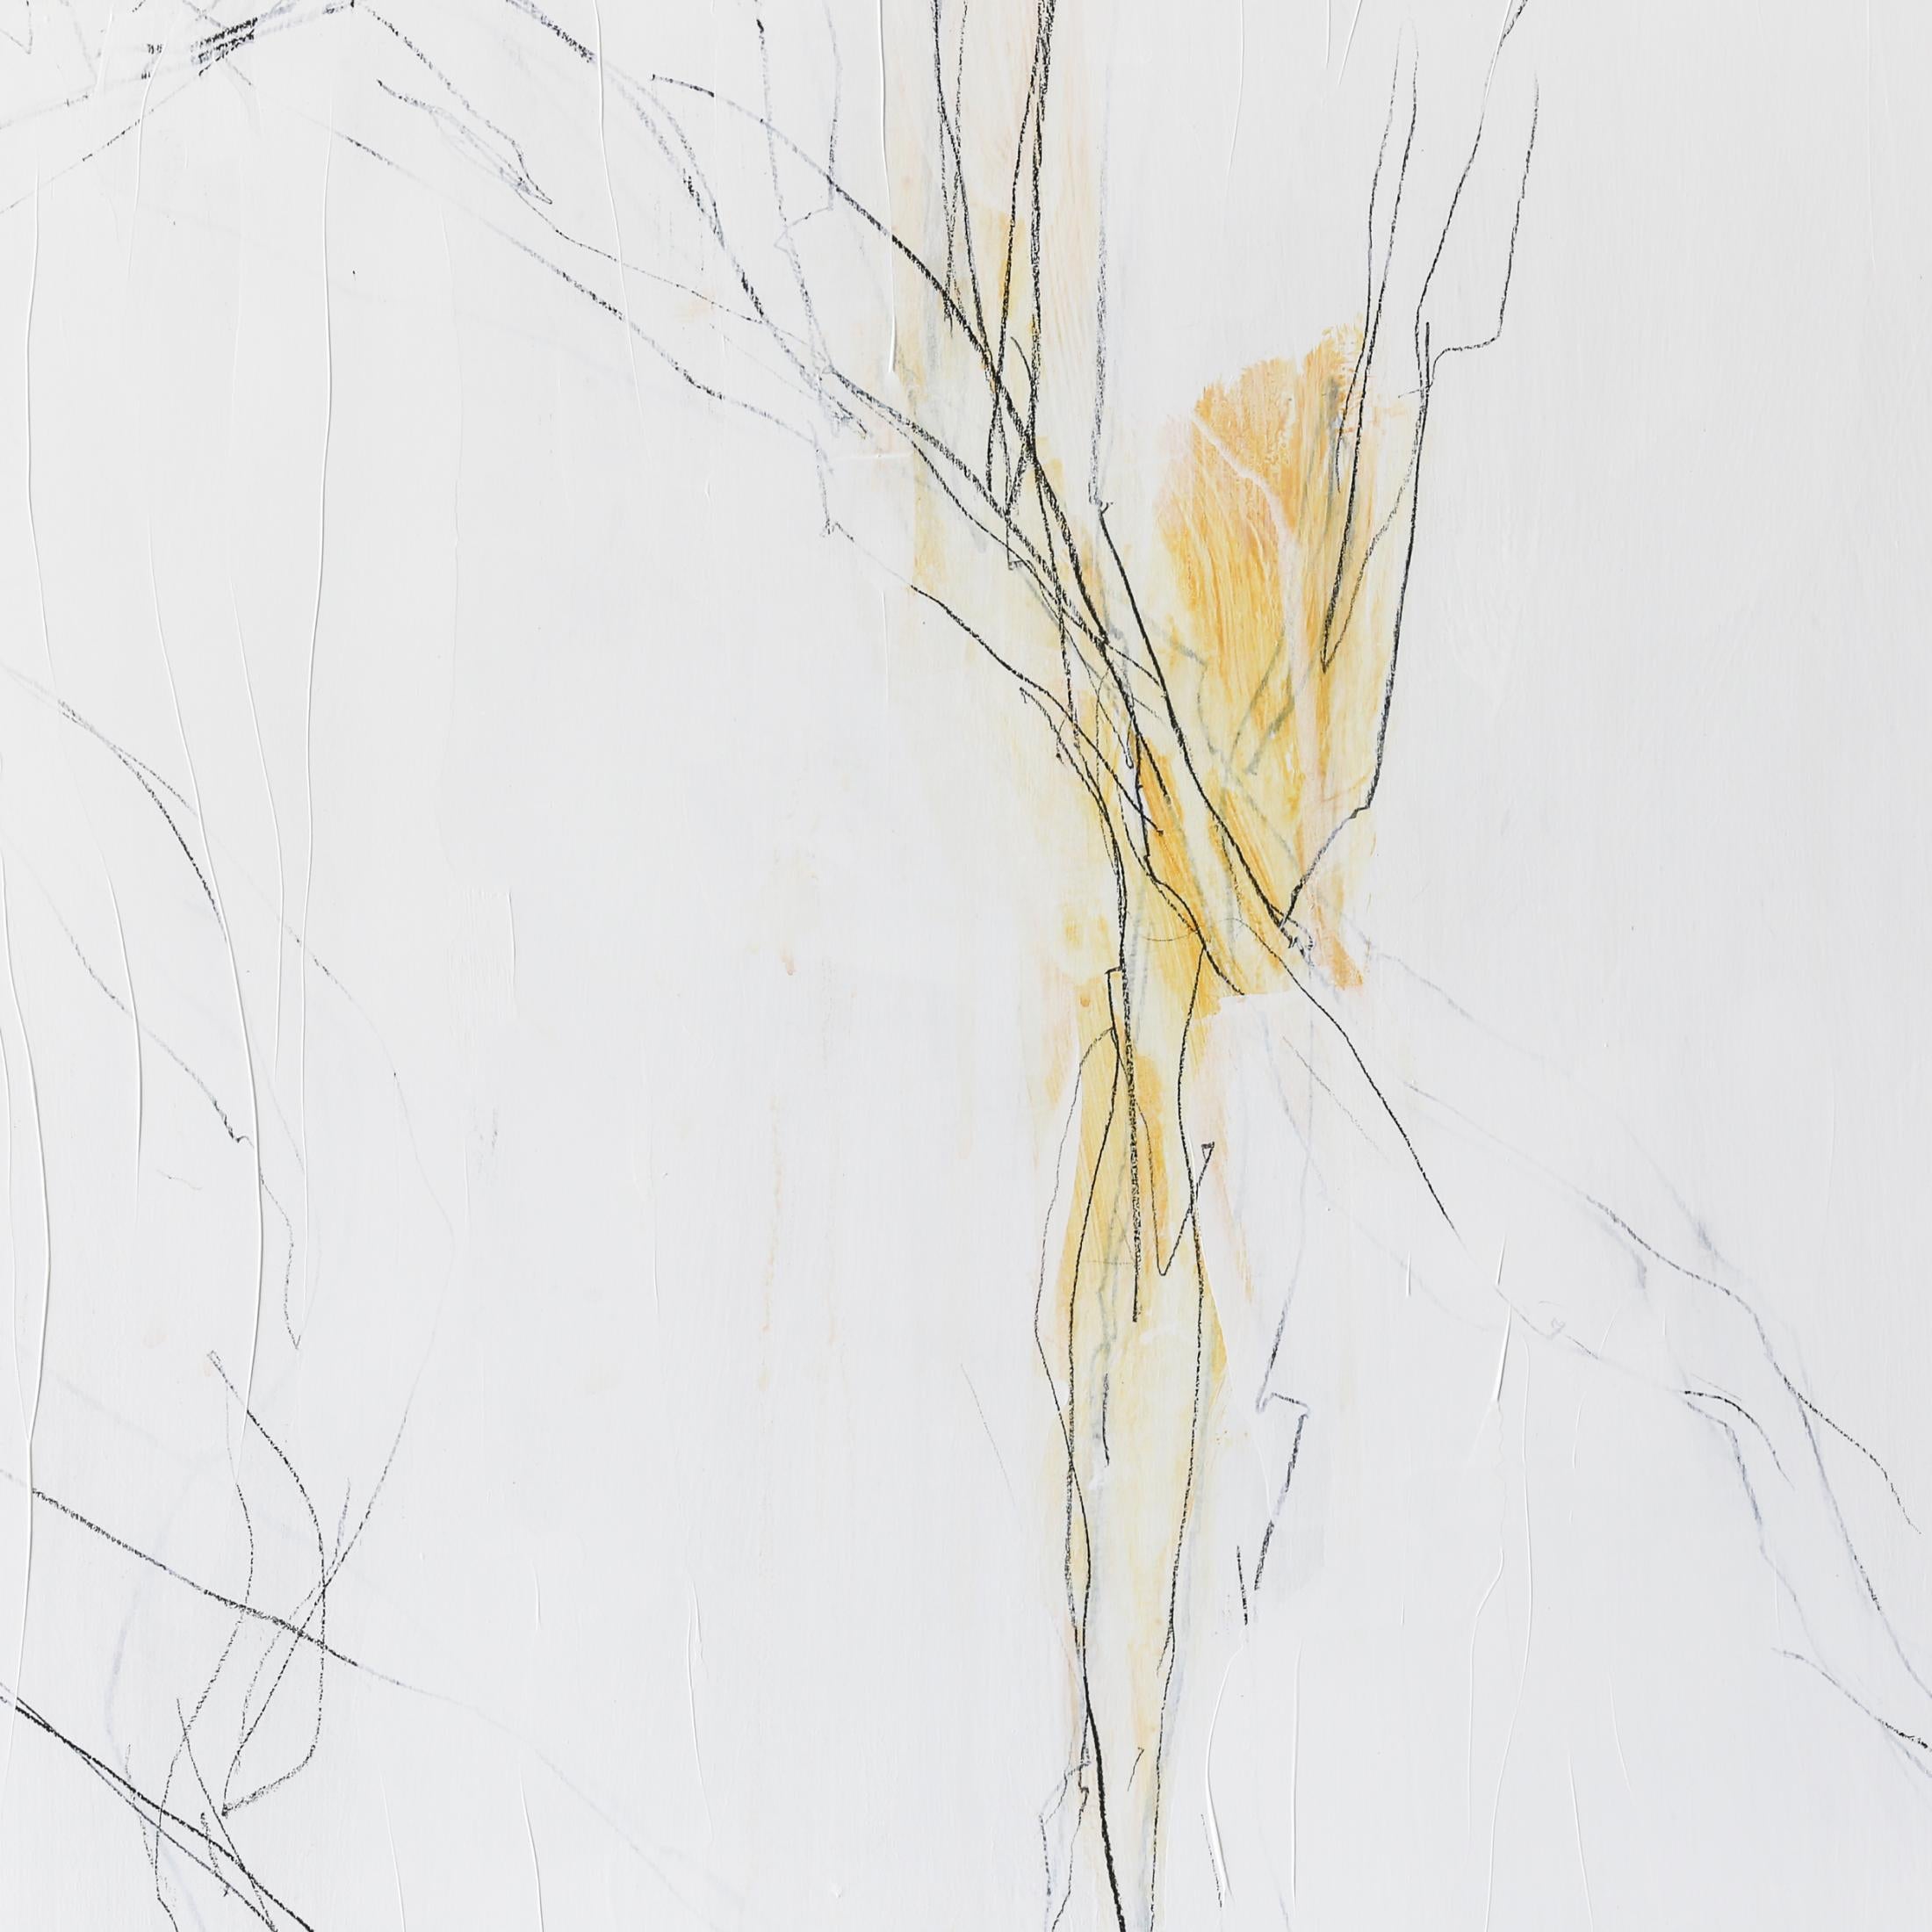 PATTI PARSONS
Stem Study
• ink stick, china marker, acrylic paint on wood panel
36.00w x 48.00h x 2.00d in
$8,700.00
From the perspective of a writer and a painter, Patti finds the intrigue of tangles and the appearance of chaos to be an accurate